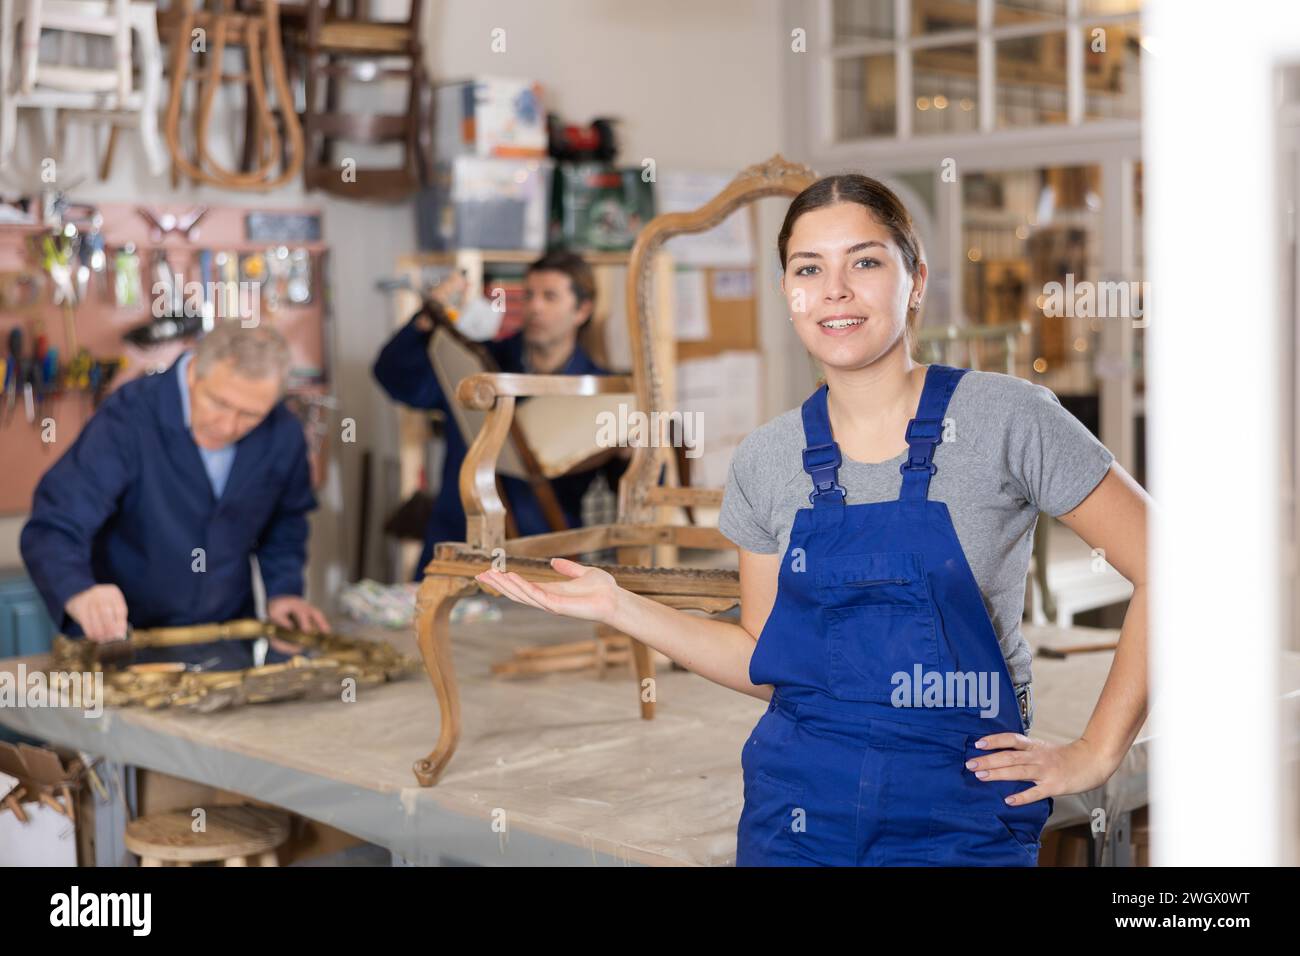 woman restorer spackling antique chair surface getting piece of furniture ready for further coloring Stock Photo